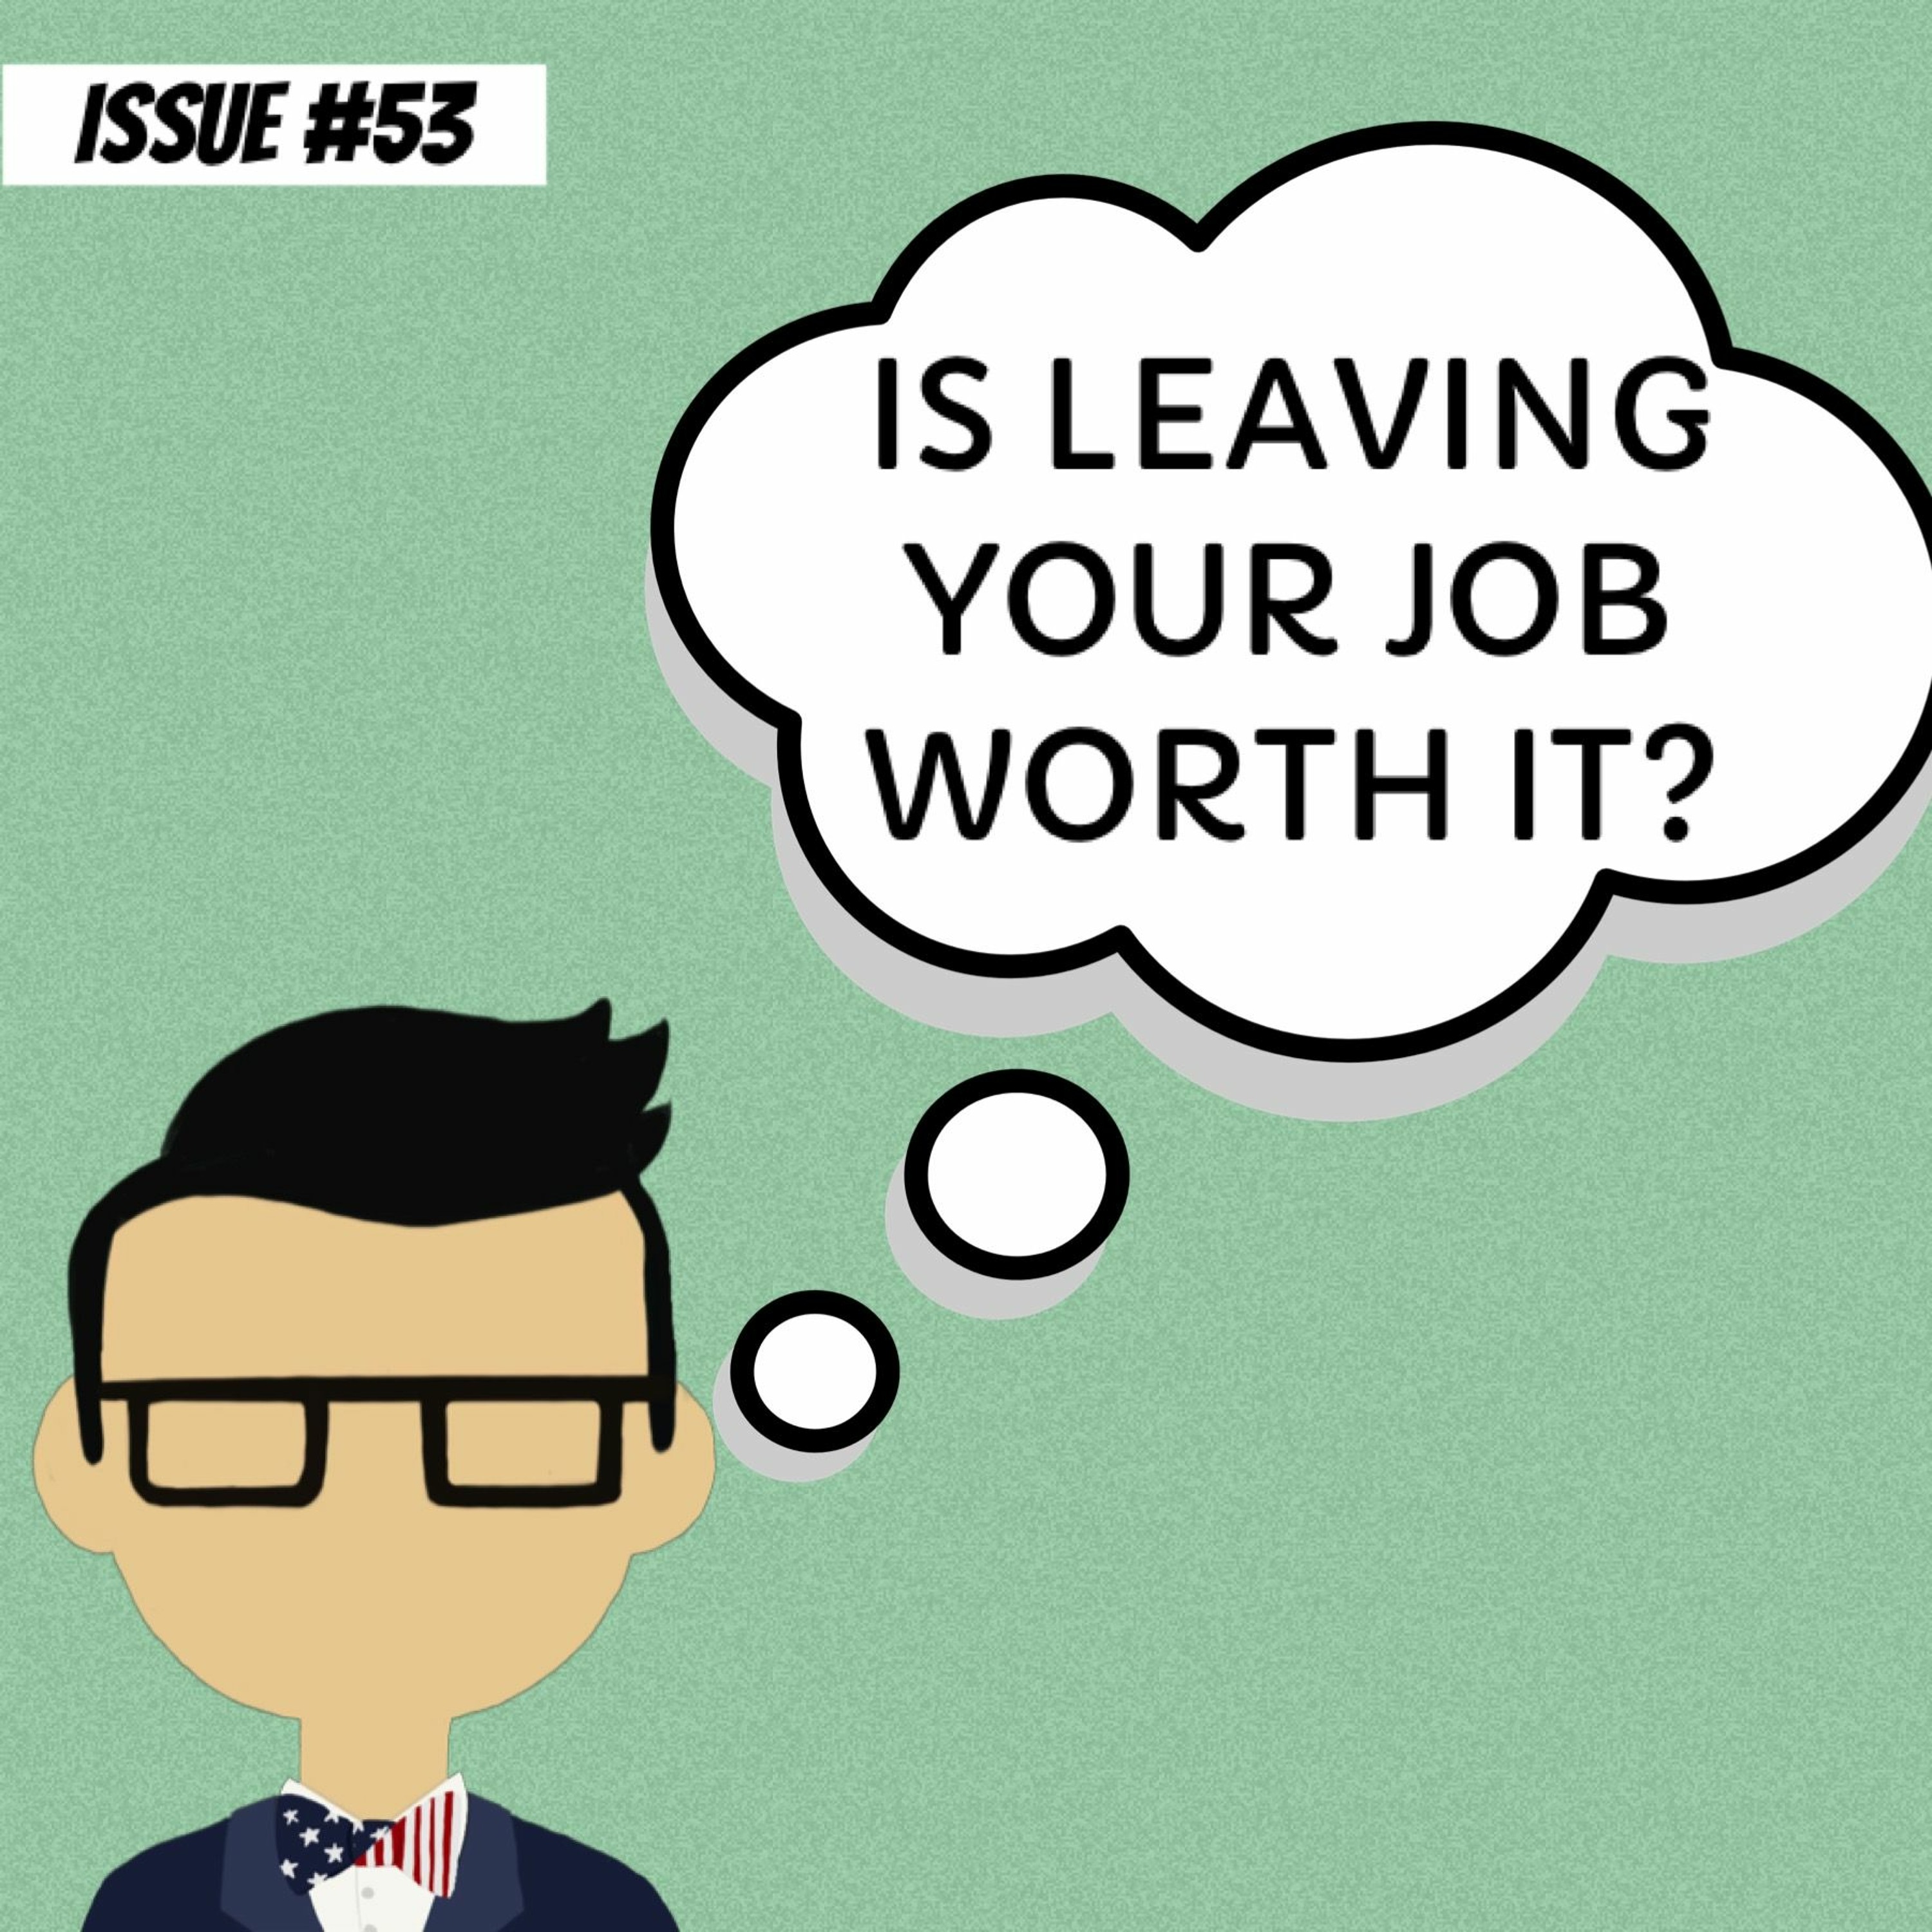 Is leaving your job worth it?